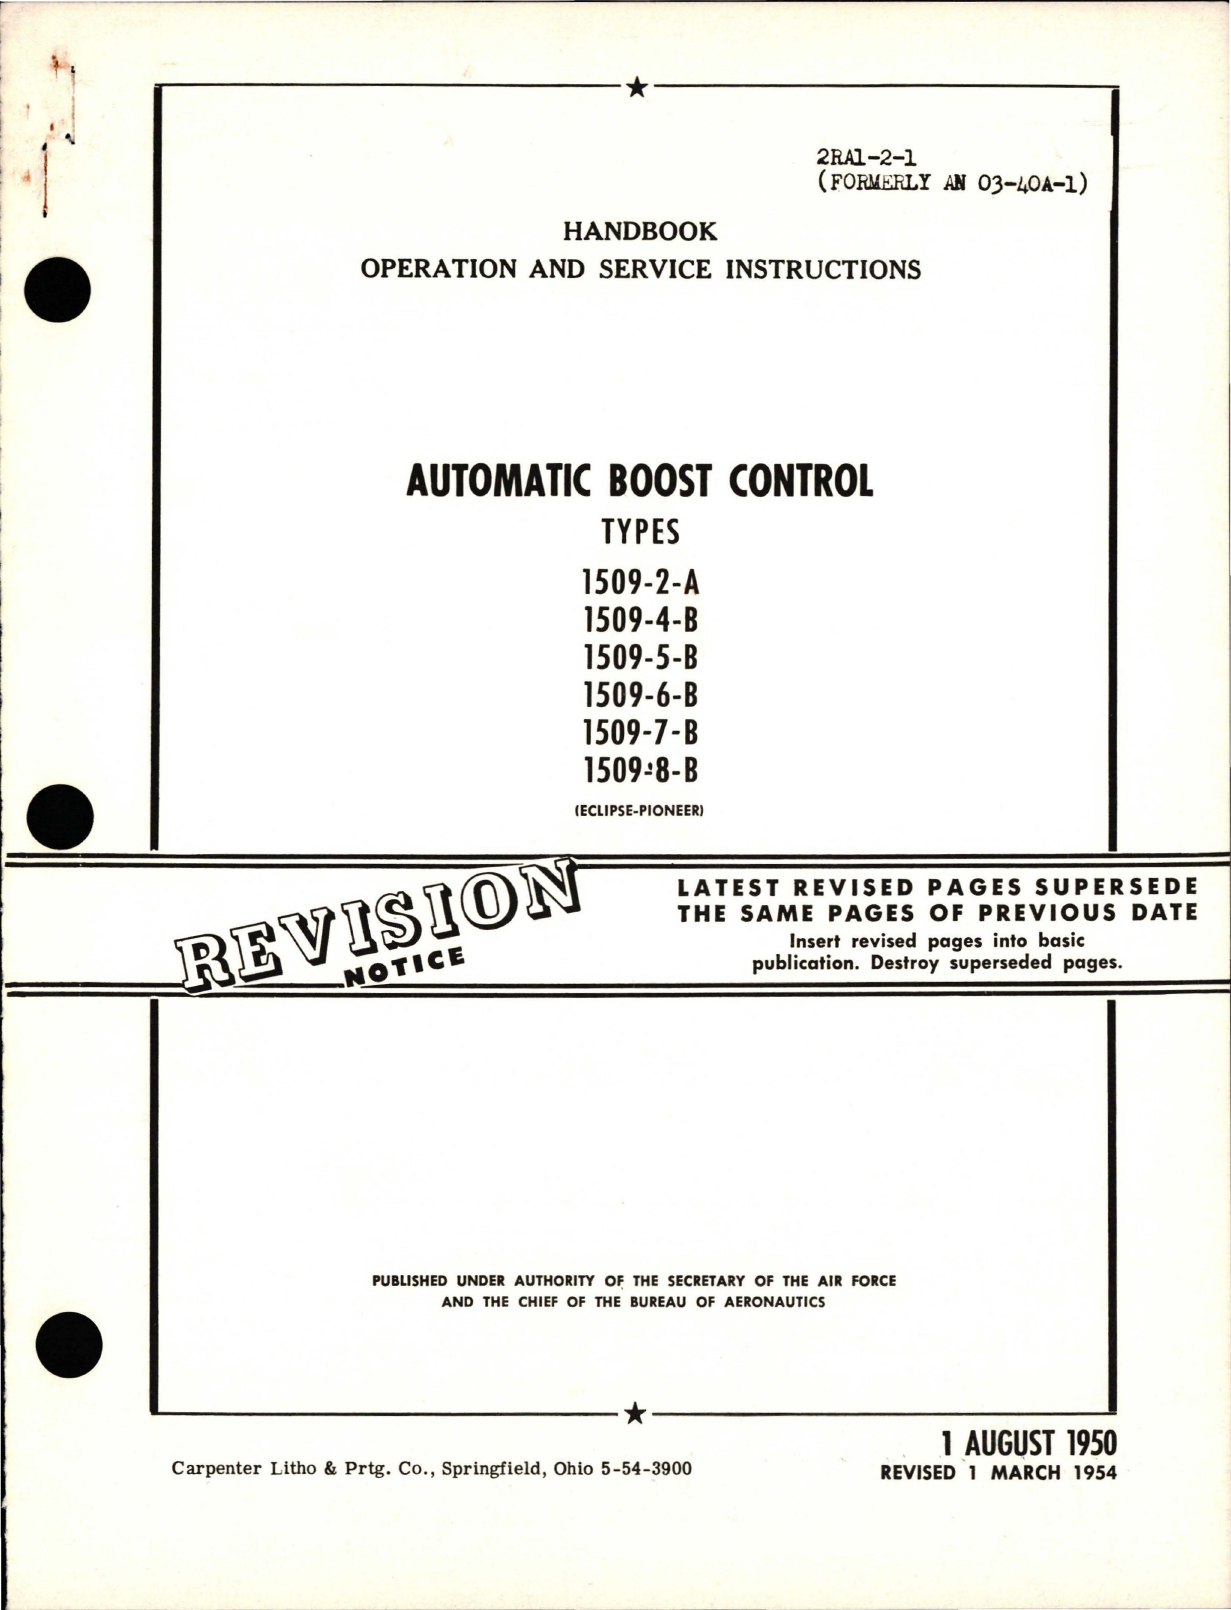 Sample page 1 from AirCorps Library document: Operation and Service Instructions for Automatic Boost Control - Types 1509-2-A, 1509-4-B, 1509-5-B, 1509-6-B, 1509-7-B, 1509-8-B